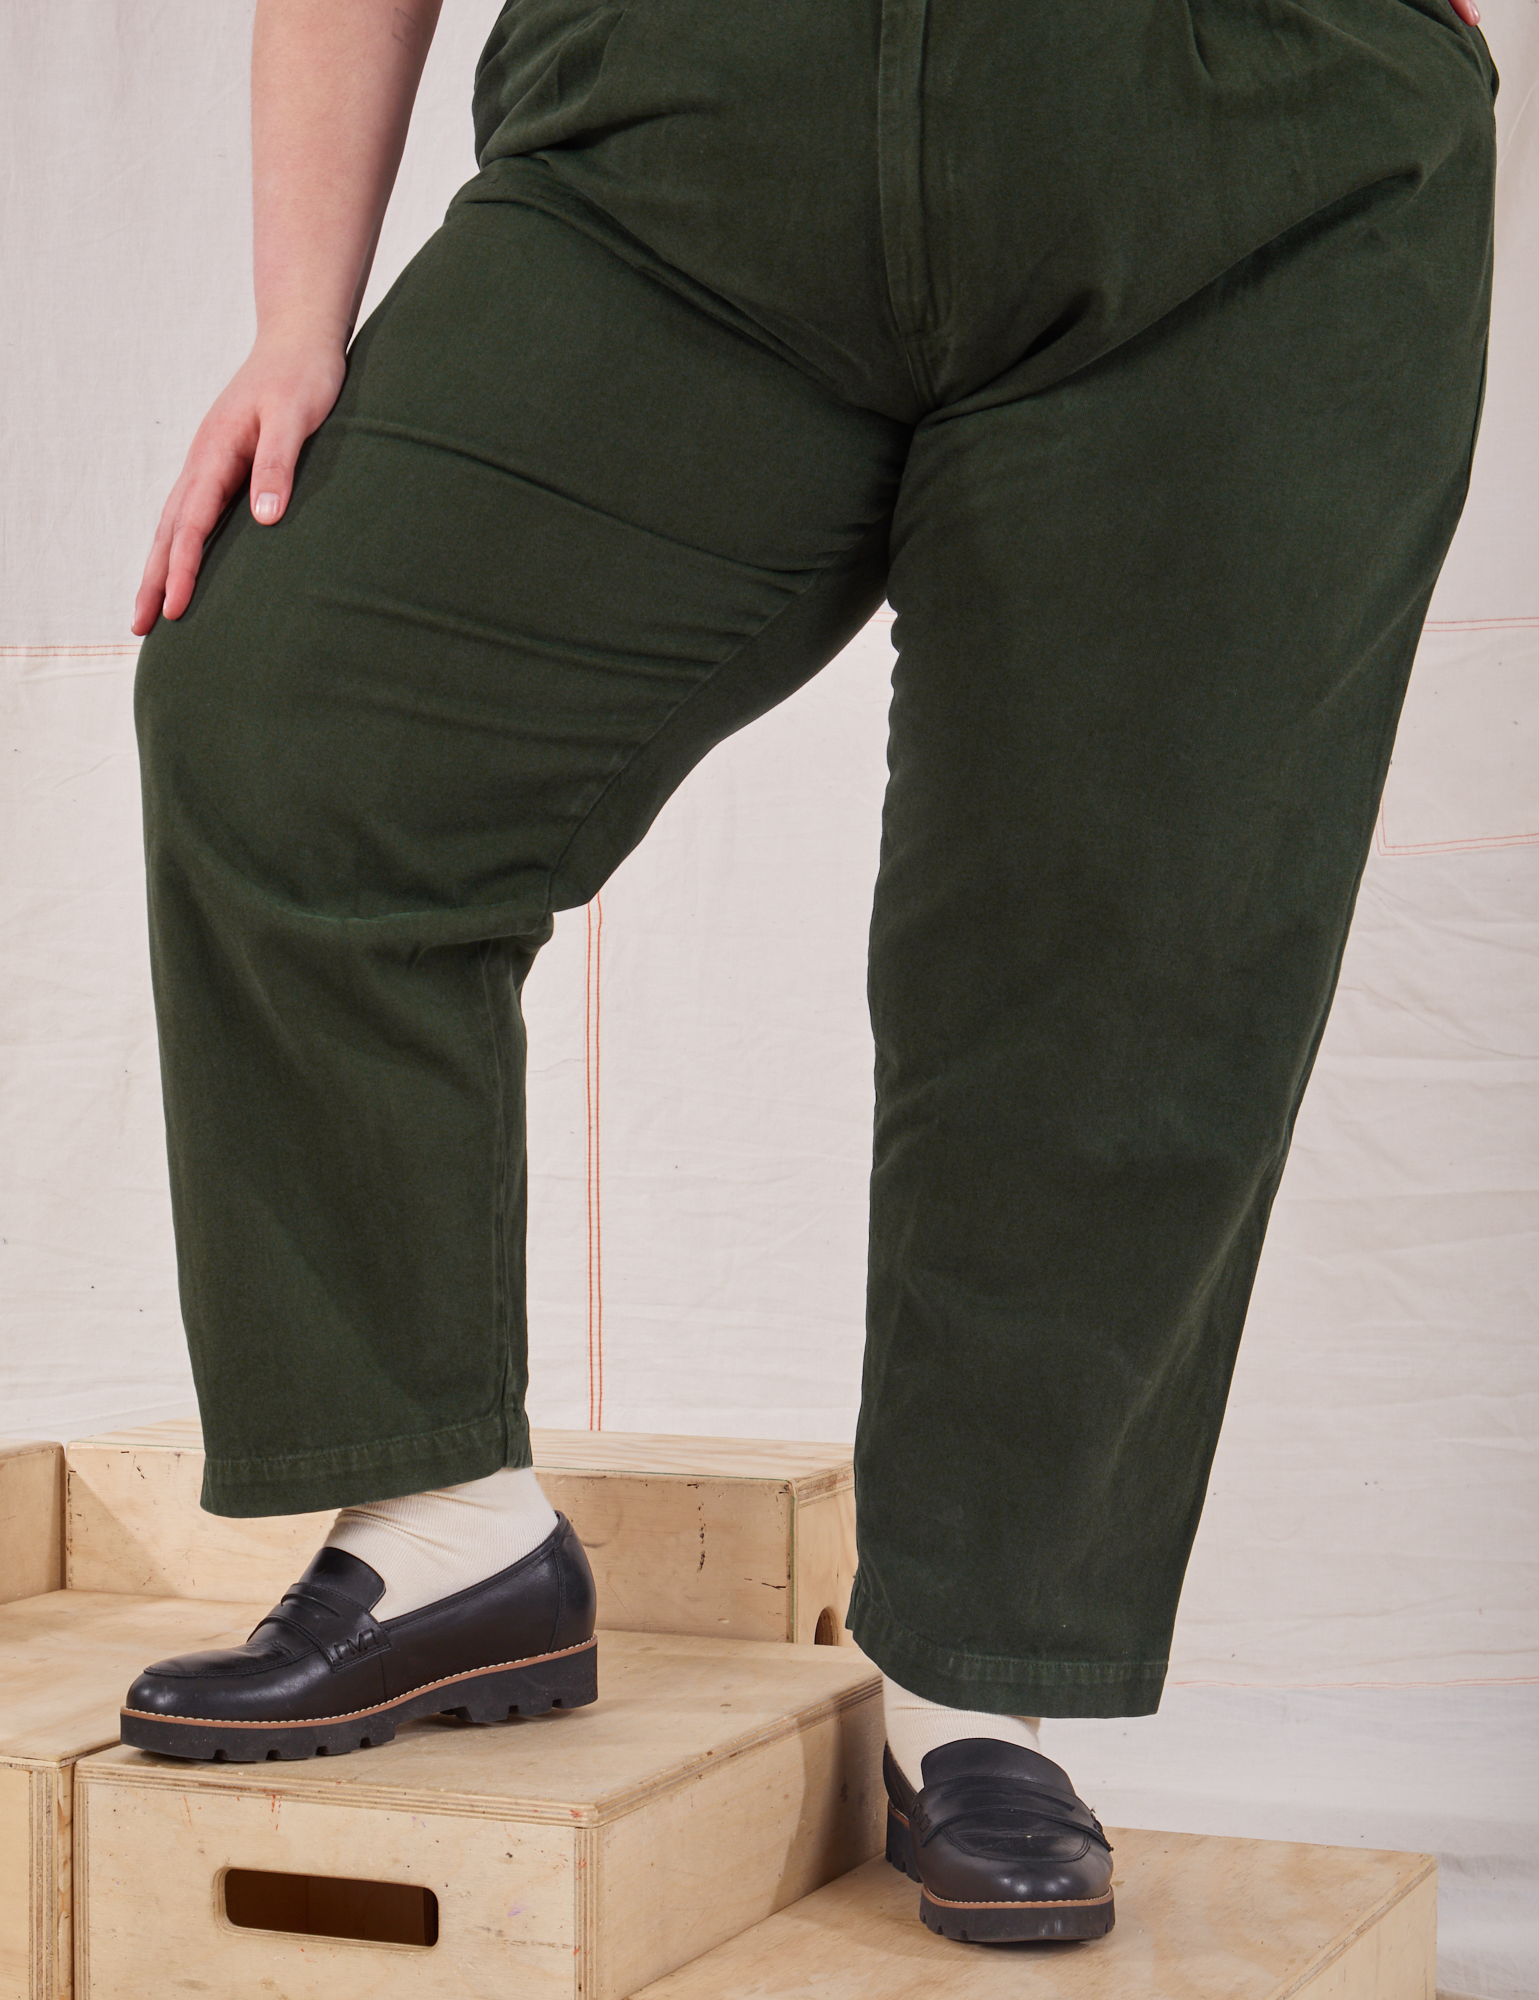 Heavyweight Trousers in Swamp Green pant leg close up on Marielena